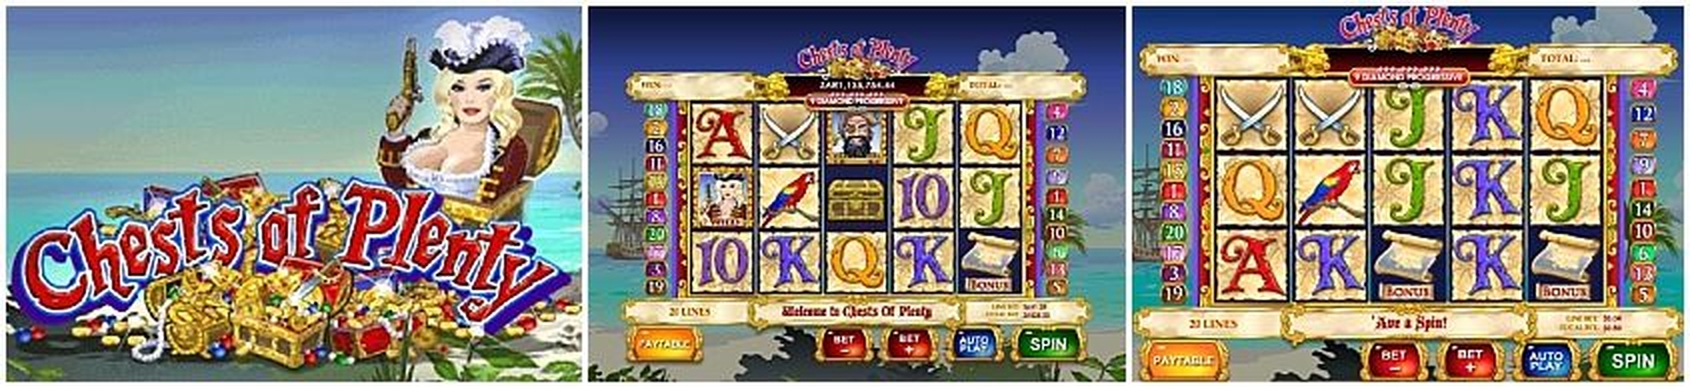 The Chests of Plenty Online Slot Demo Game by Ash Gaming